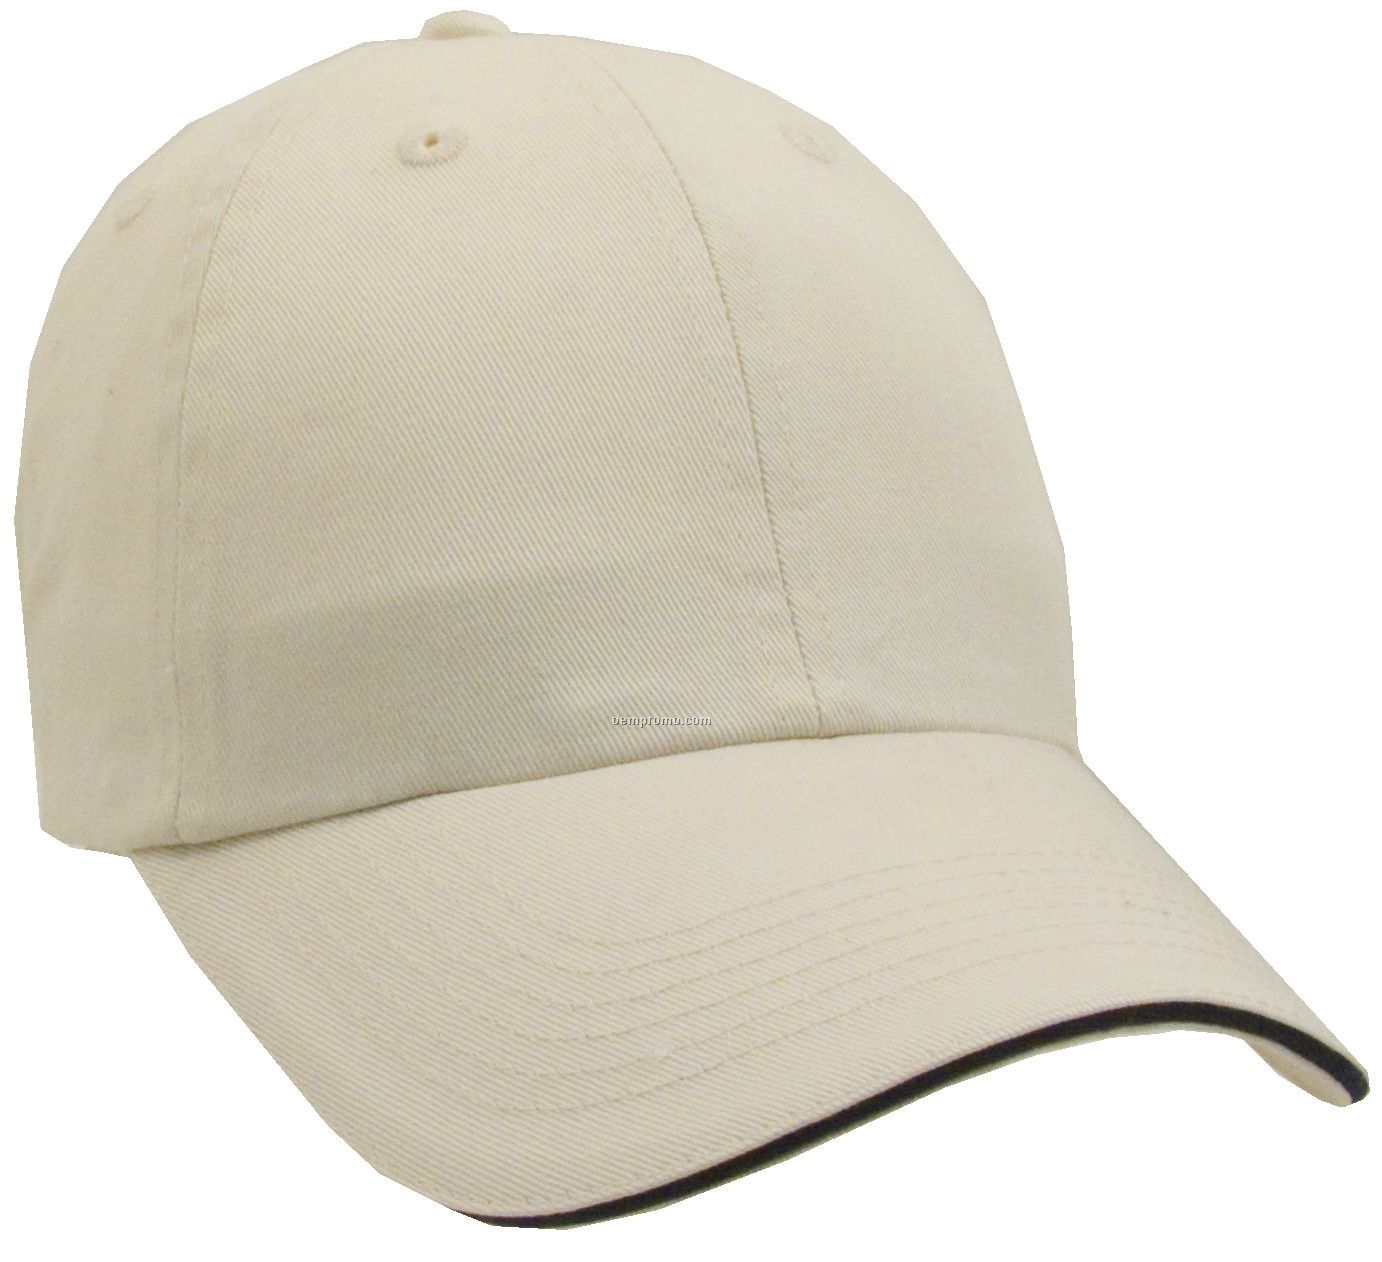 Unconstructed Chino Washed Cotton Twill Sandwich Cap (Domestic 5 Day)